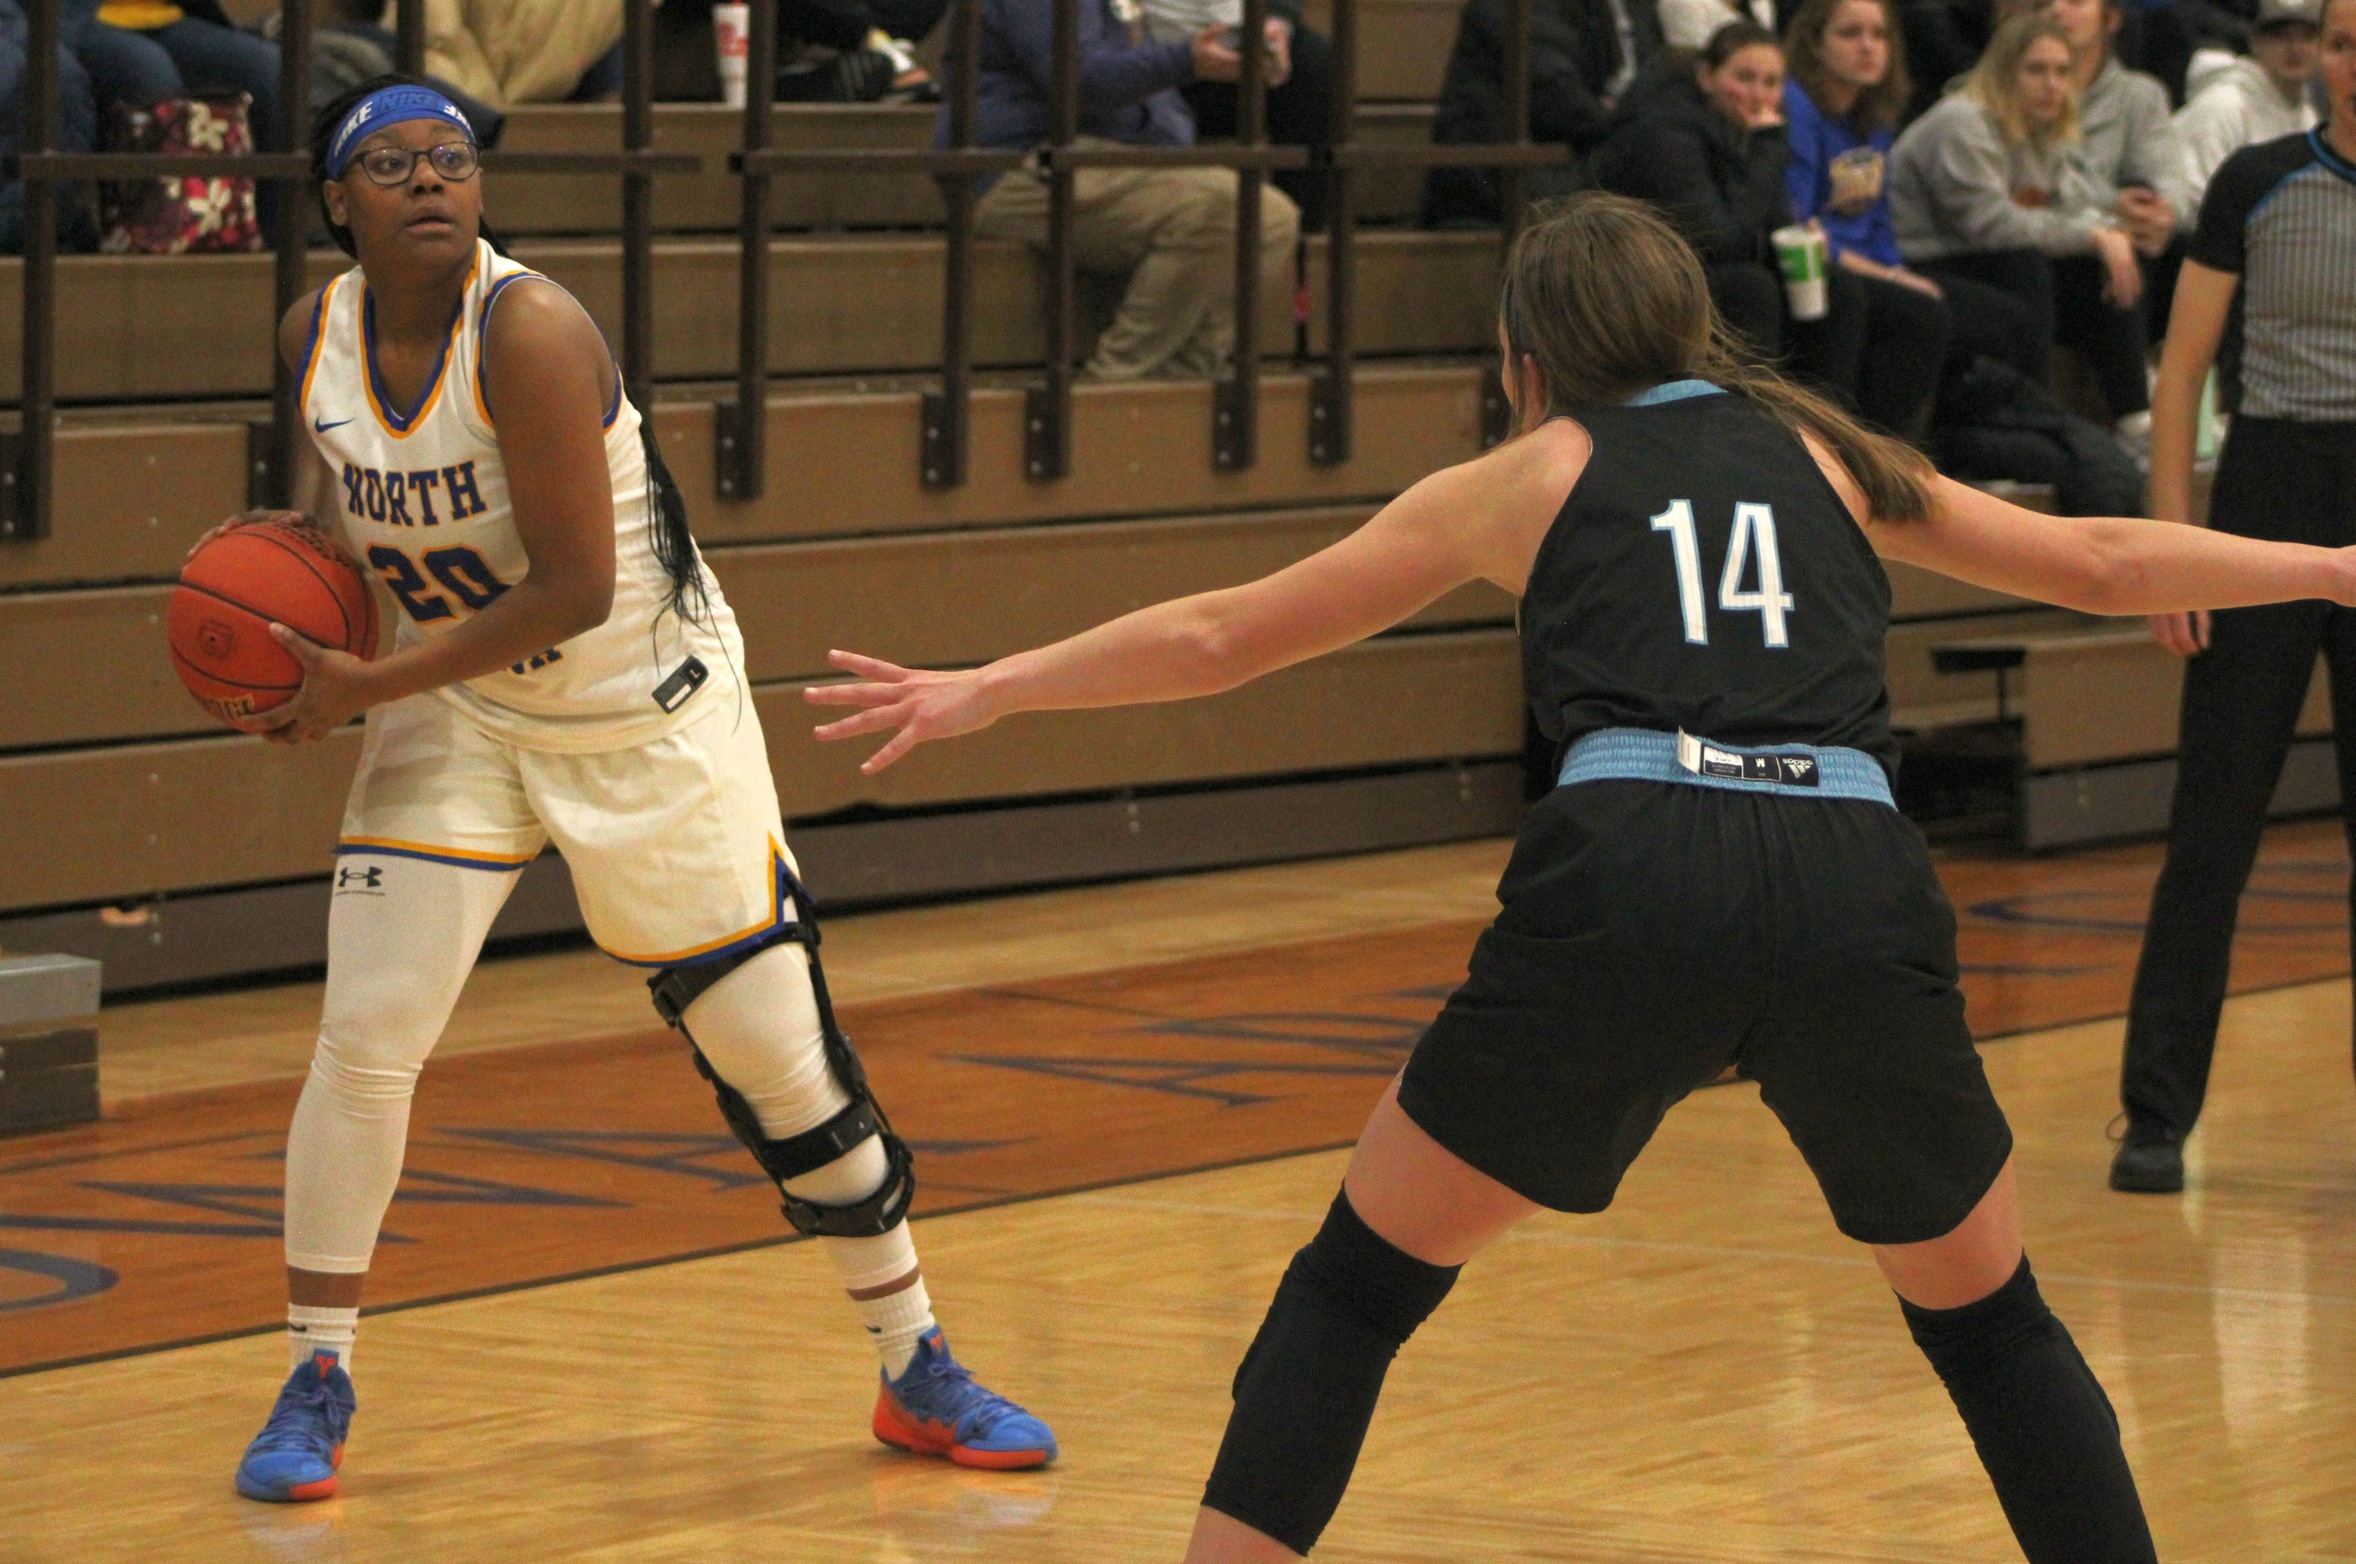 NIACC's Jasmine Jackson looks to pass the ball in the first half of Wednesday's game against Iowa Central.